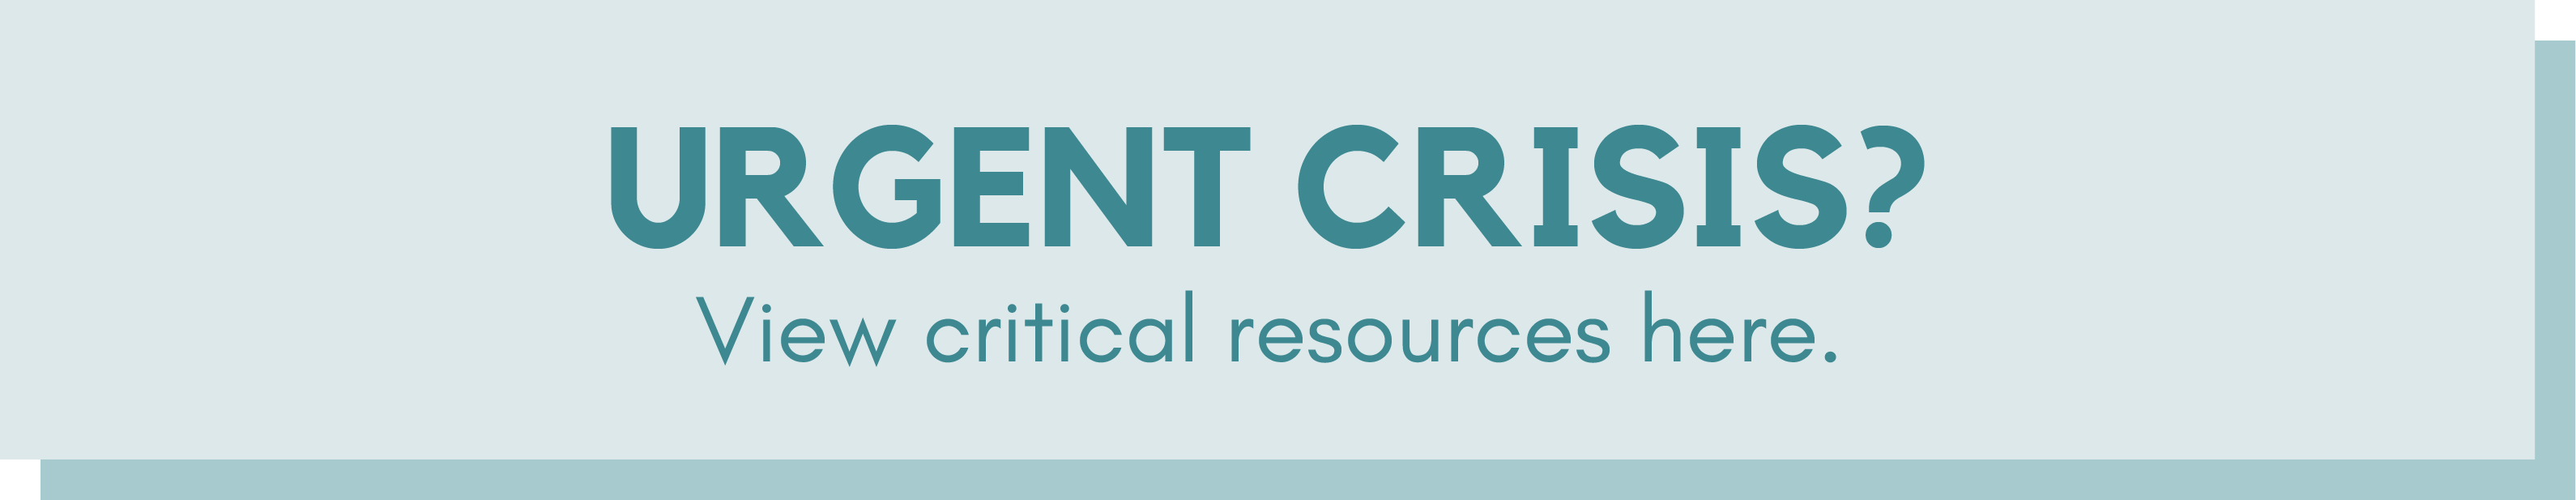 Urgent Crisis? View critical resources here